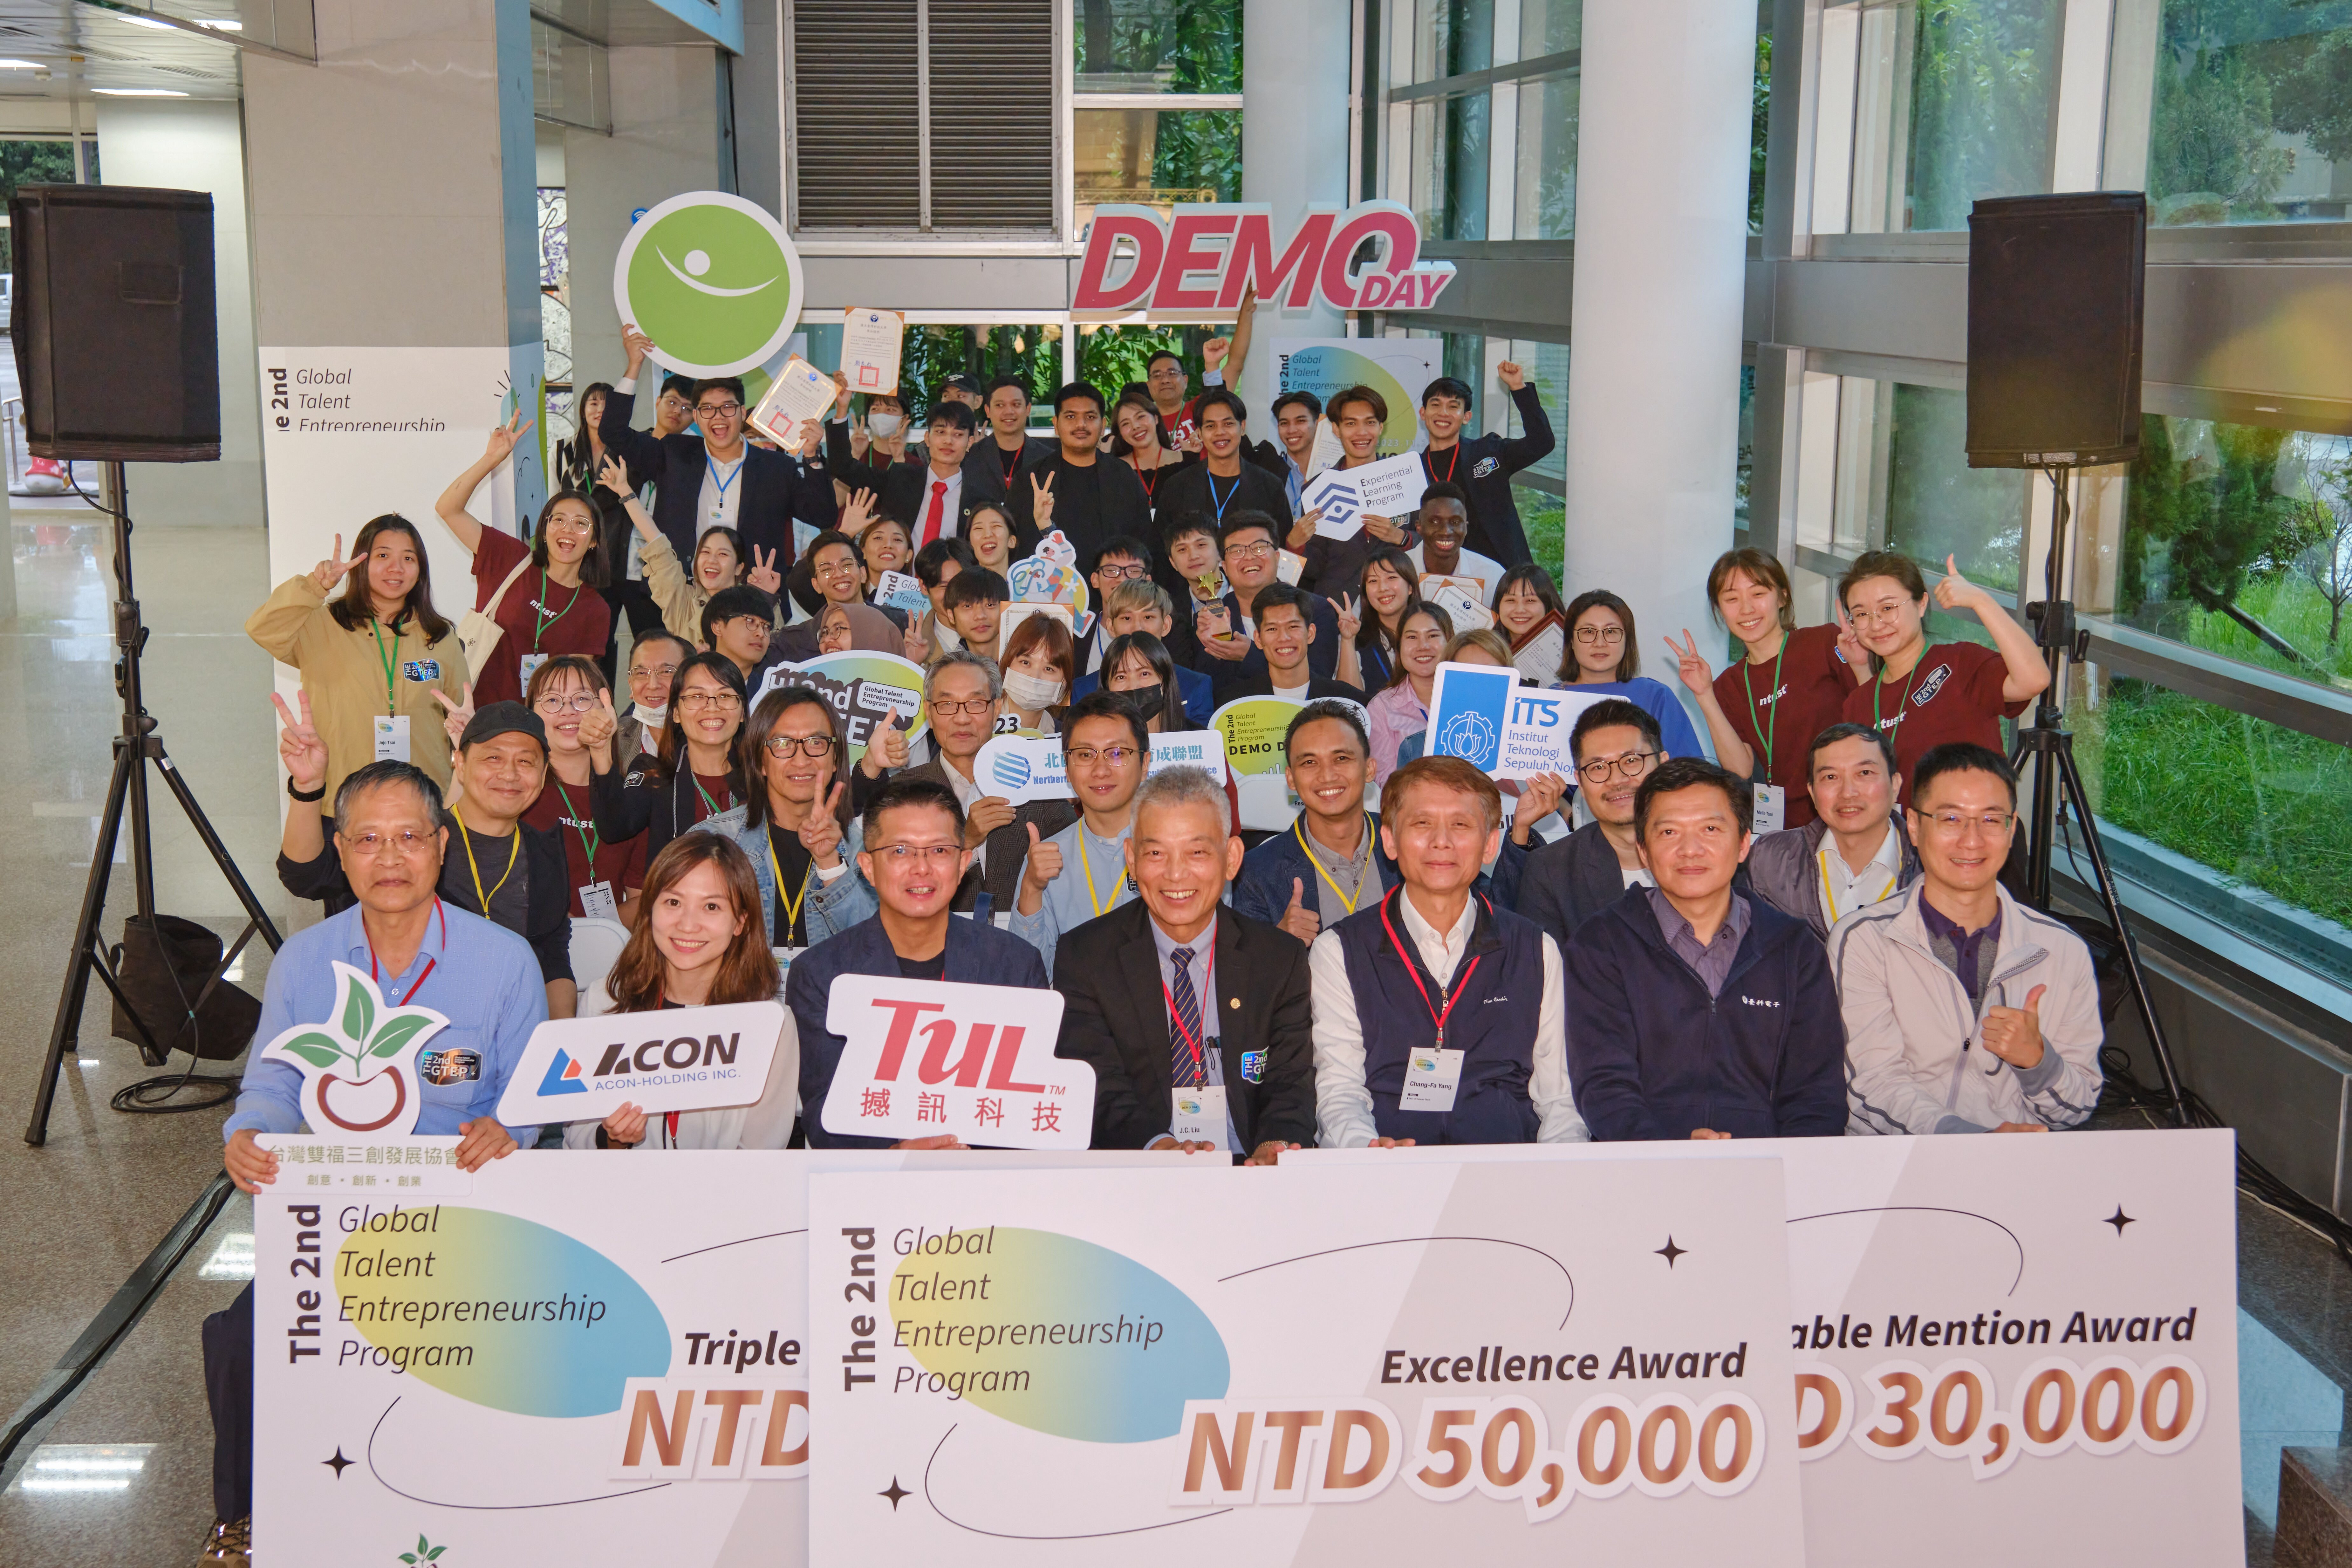 Below is a group photo from the Demo Day of the second edition of Taiwan Tech's “Global Talent Entrepreneurship Program Orientation”.